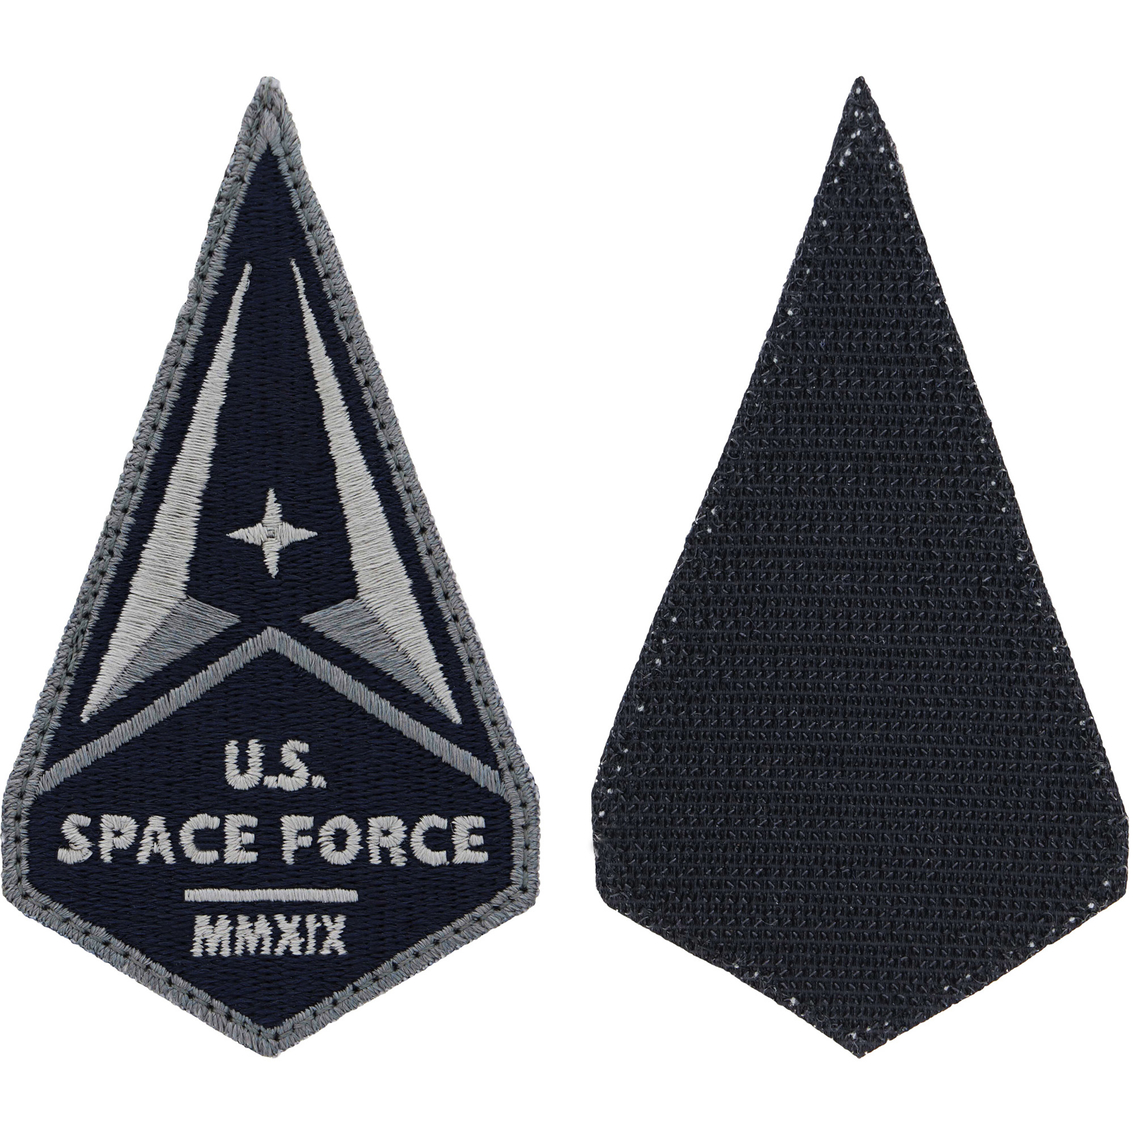 Space Force Service Patch